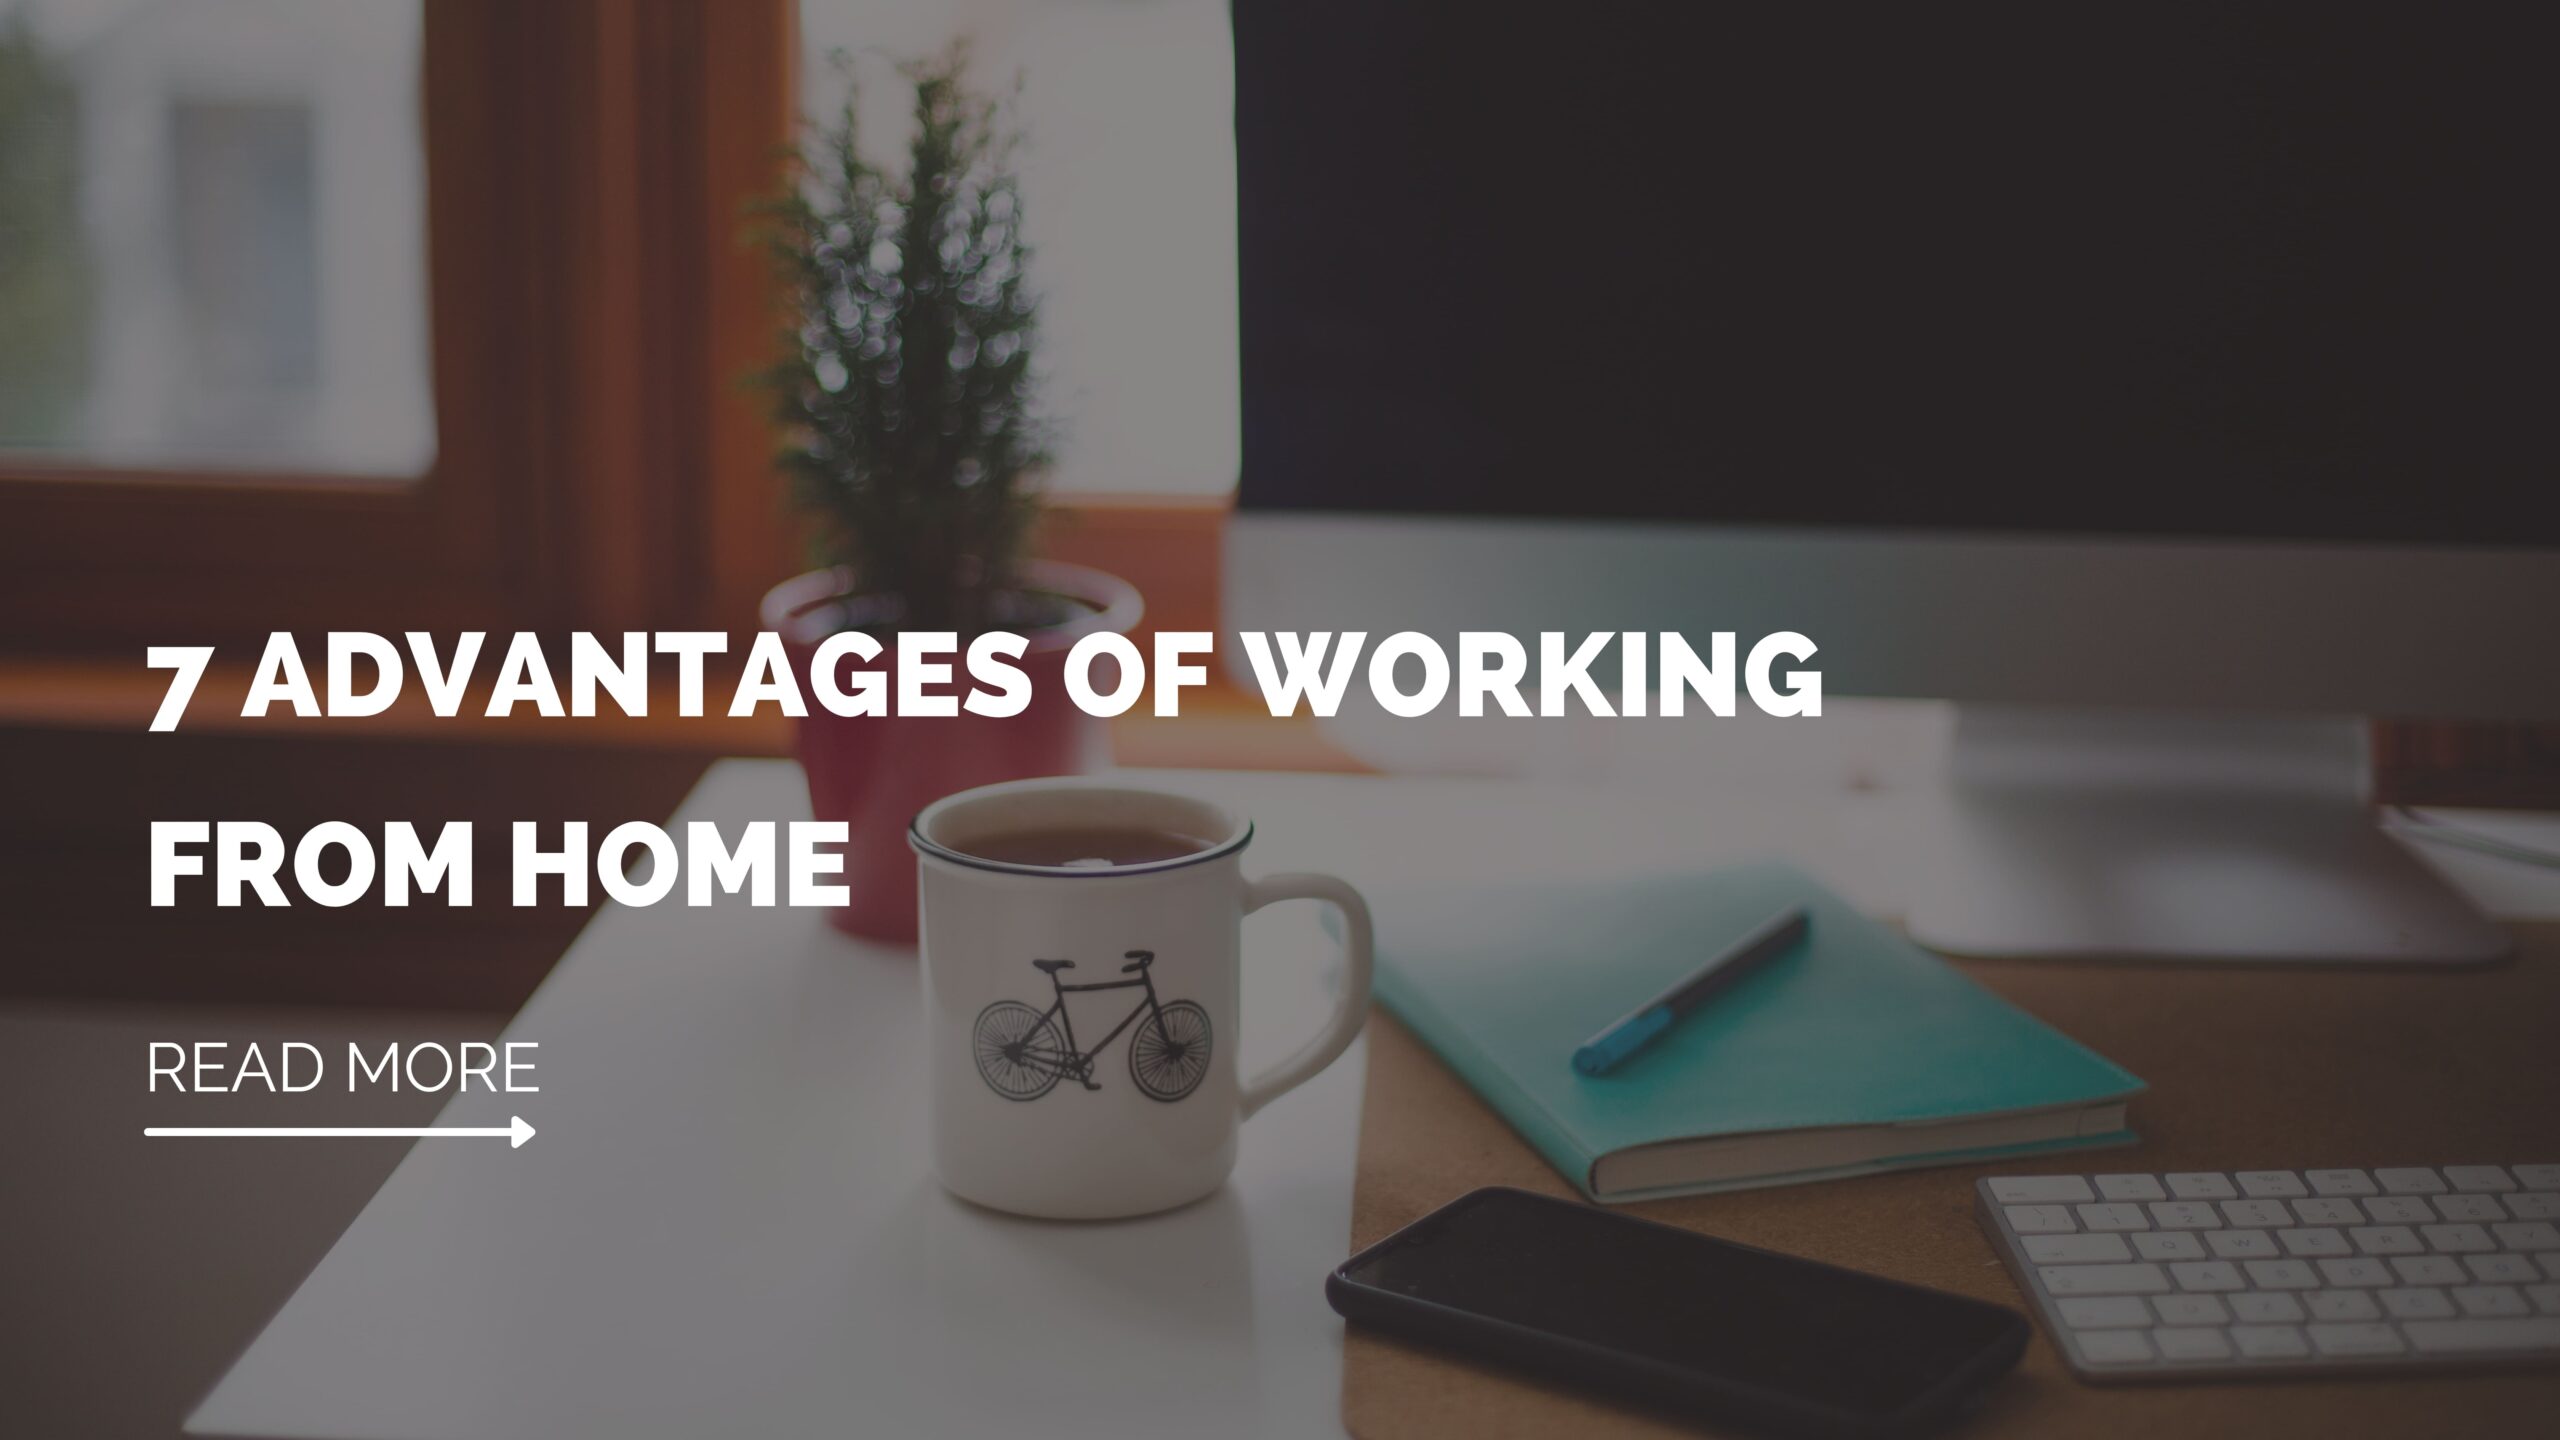 7 benefits of working from home